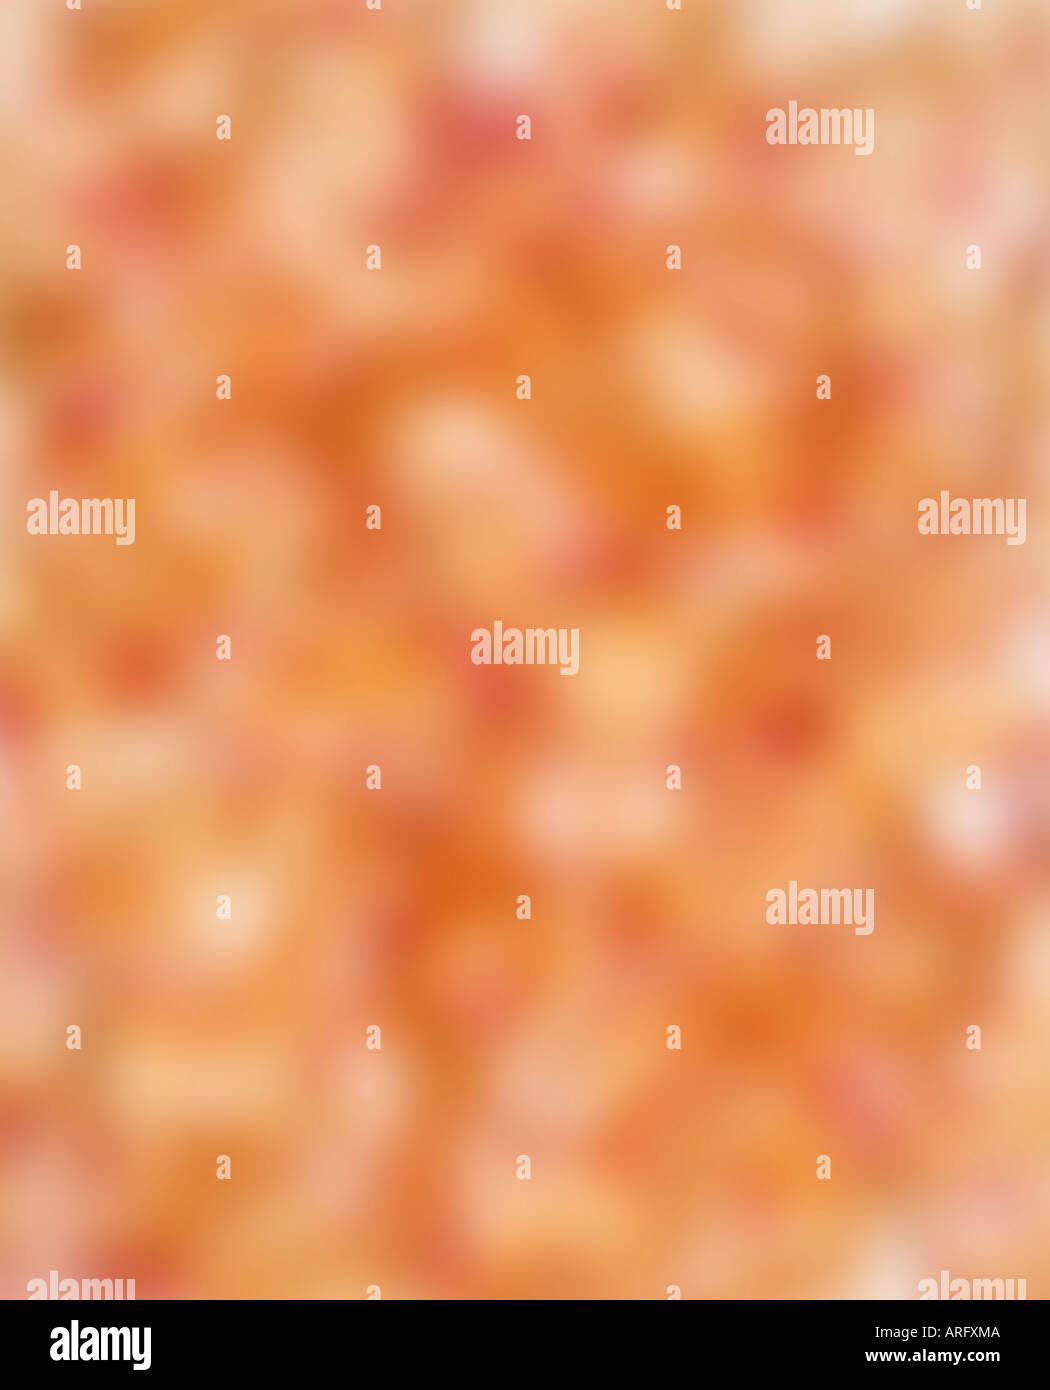 ABSTRACT ORANGE BACKGROUND WITH RANDOM PATTERN Stock Photo